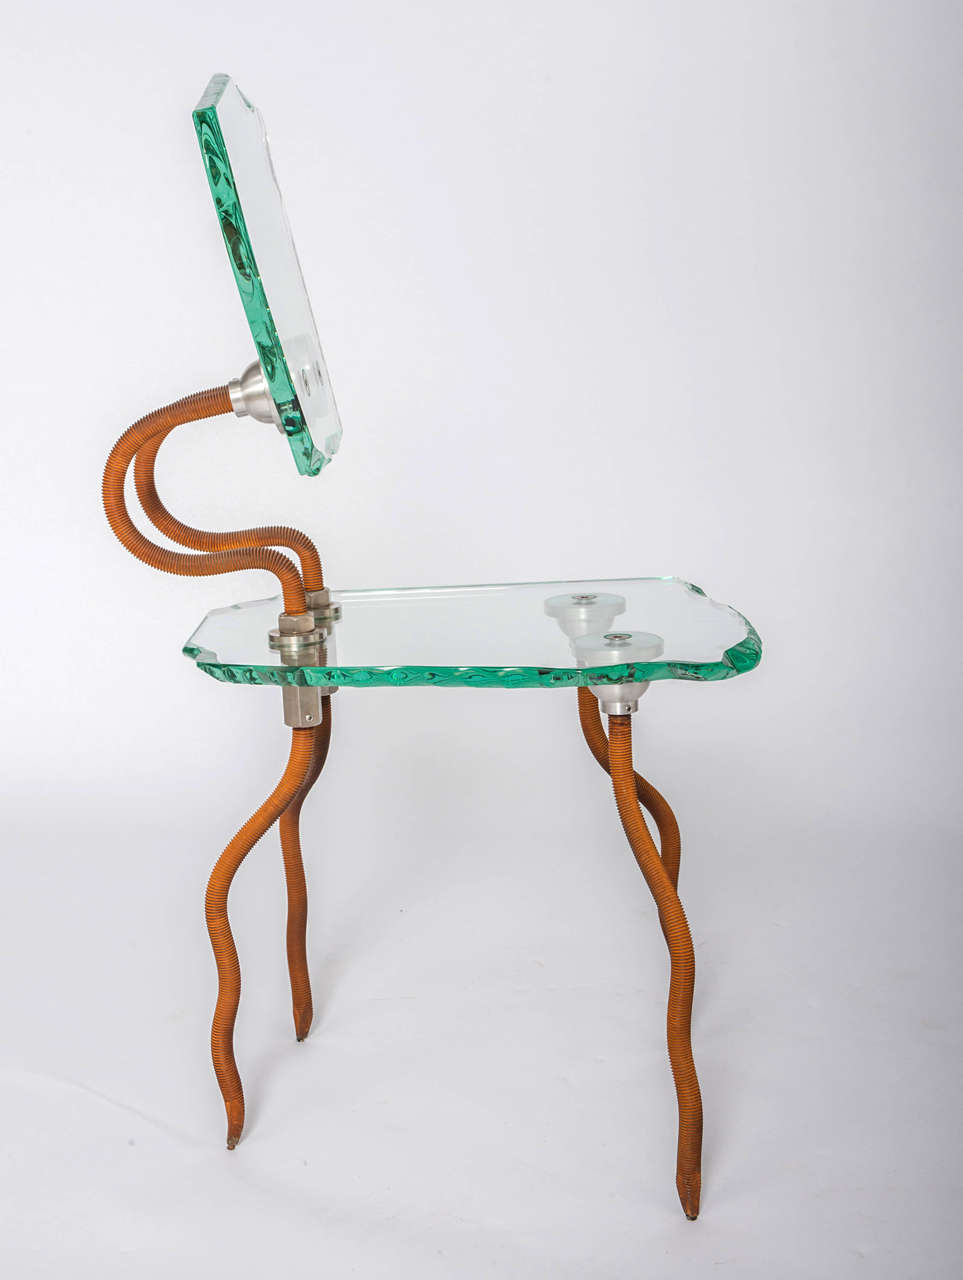 A Danny Lane “Etruscan Chair”.
For Danny Lane Studios.
Designed 1984 and executed in 1988.
Sand blasted and rusted steel, forged Stainless-steel and hammer chipped polished glass.
Etched signature Danny Lane 8/100 88 RF
90 x 38 48 cm